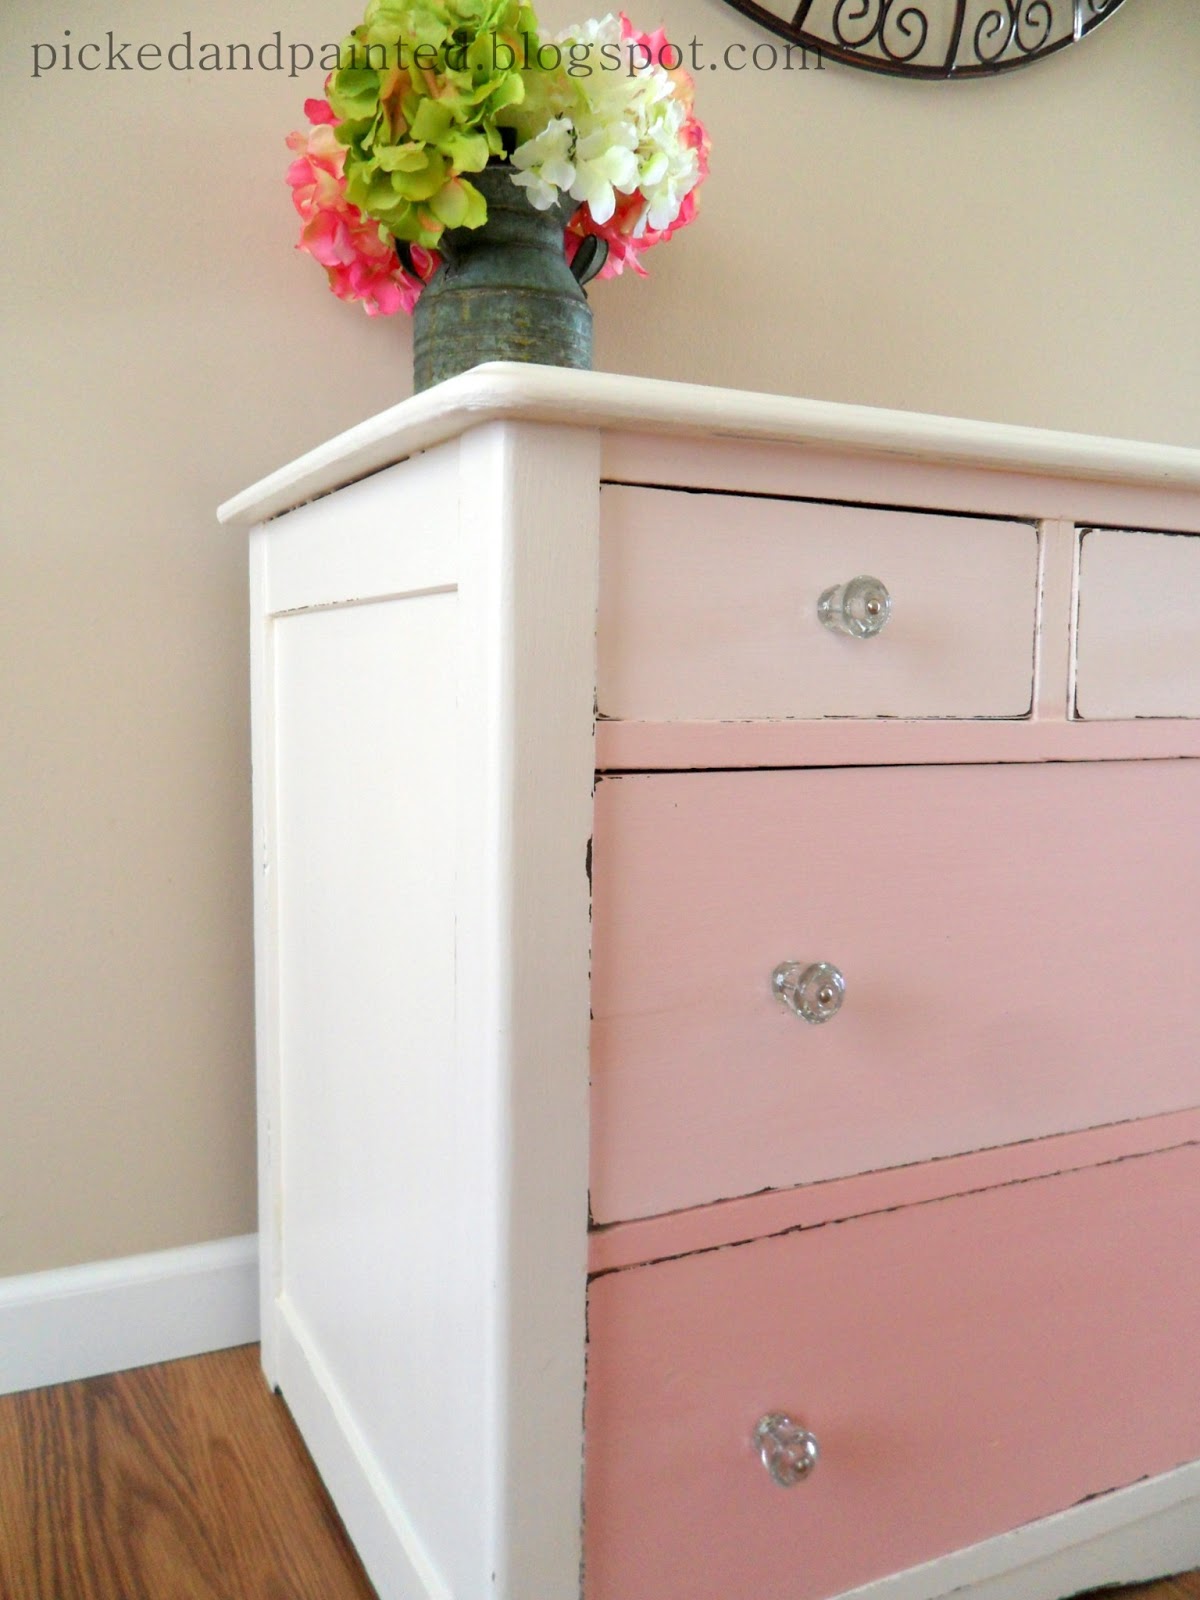 Picked & Painted: Pink Ombre Dresser